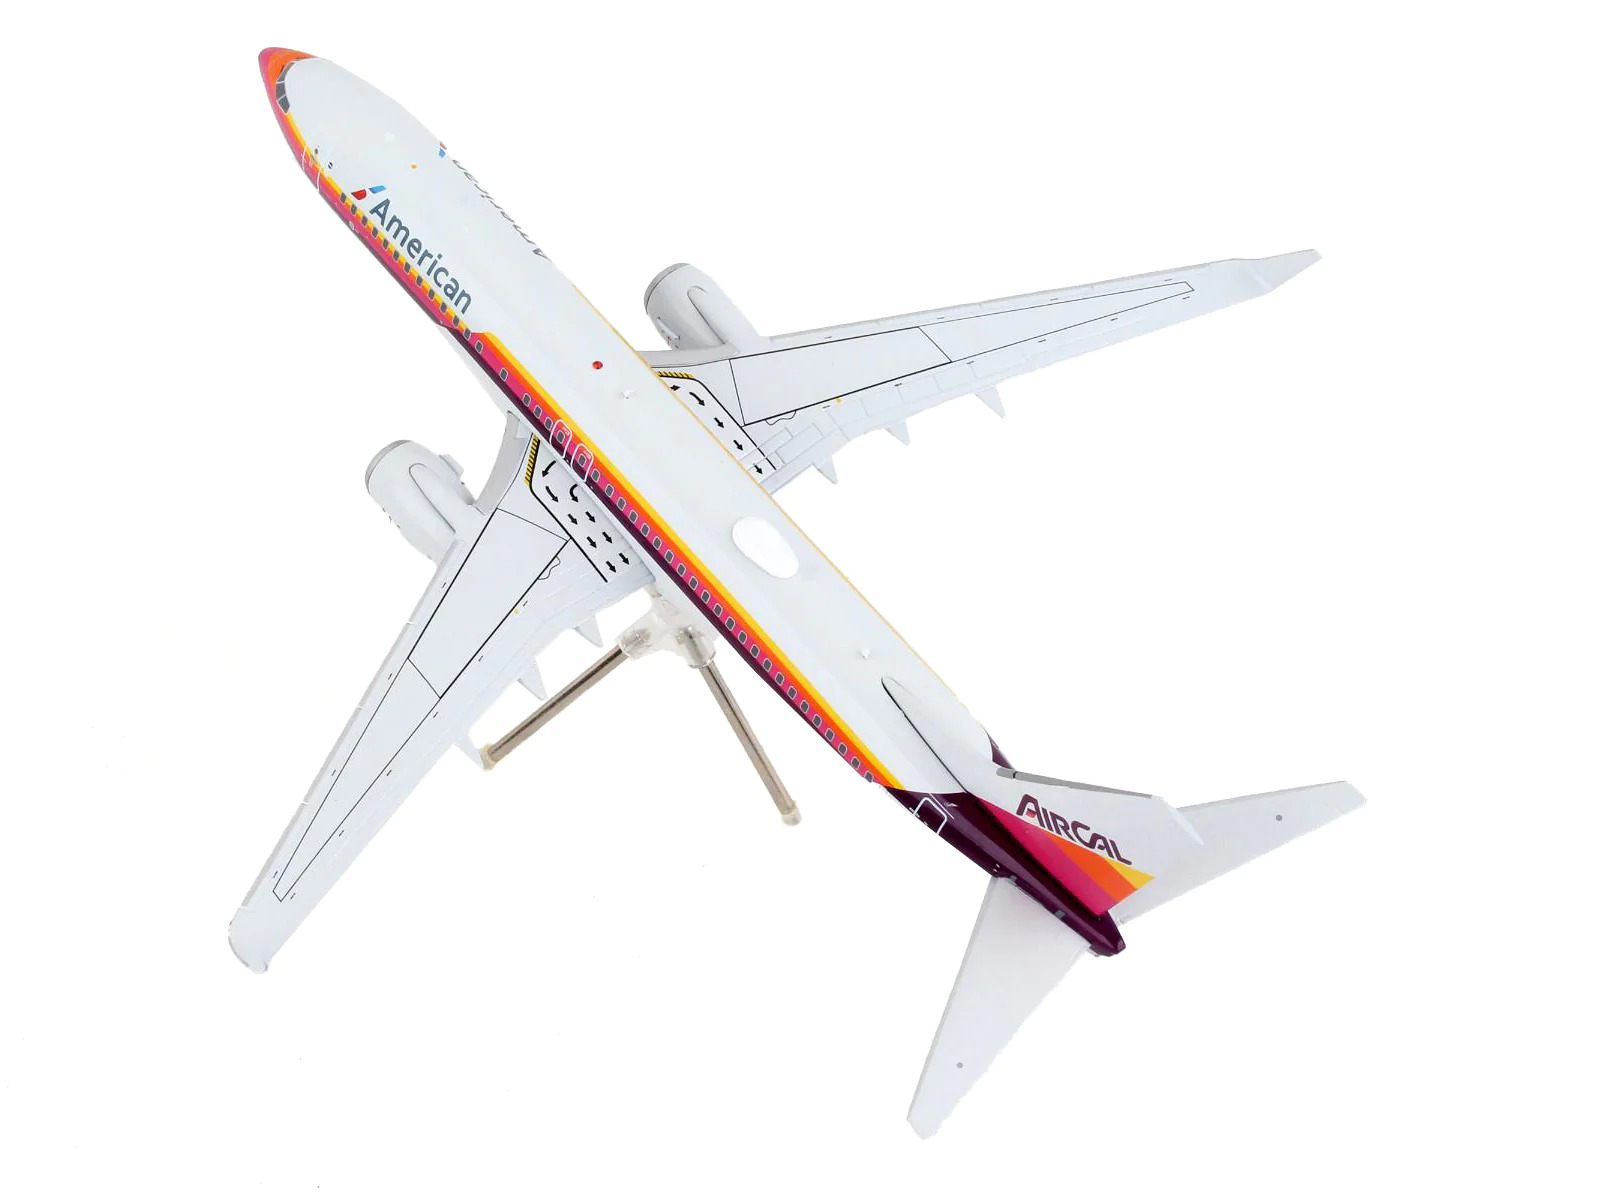 Boeing 737-800 Commercial Airlines - AirCal Gemini 1/200 Diecast Model Airplane